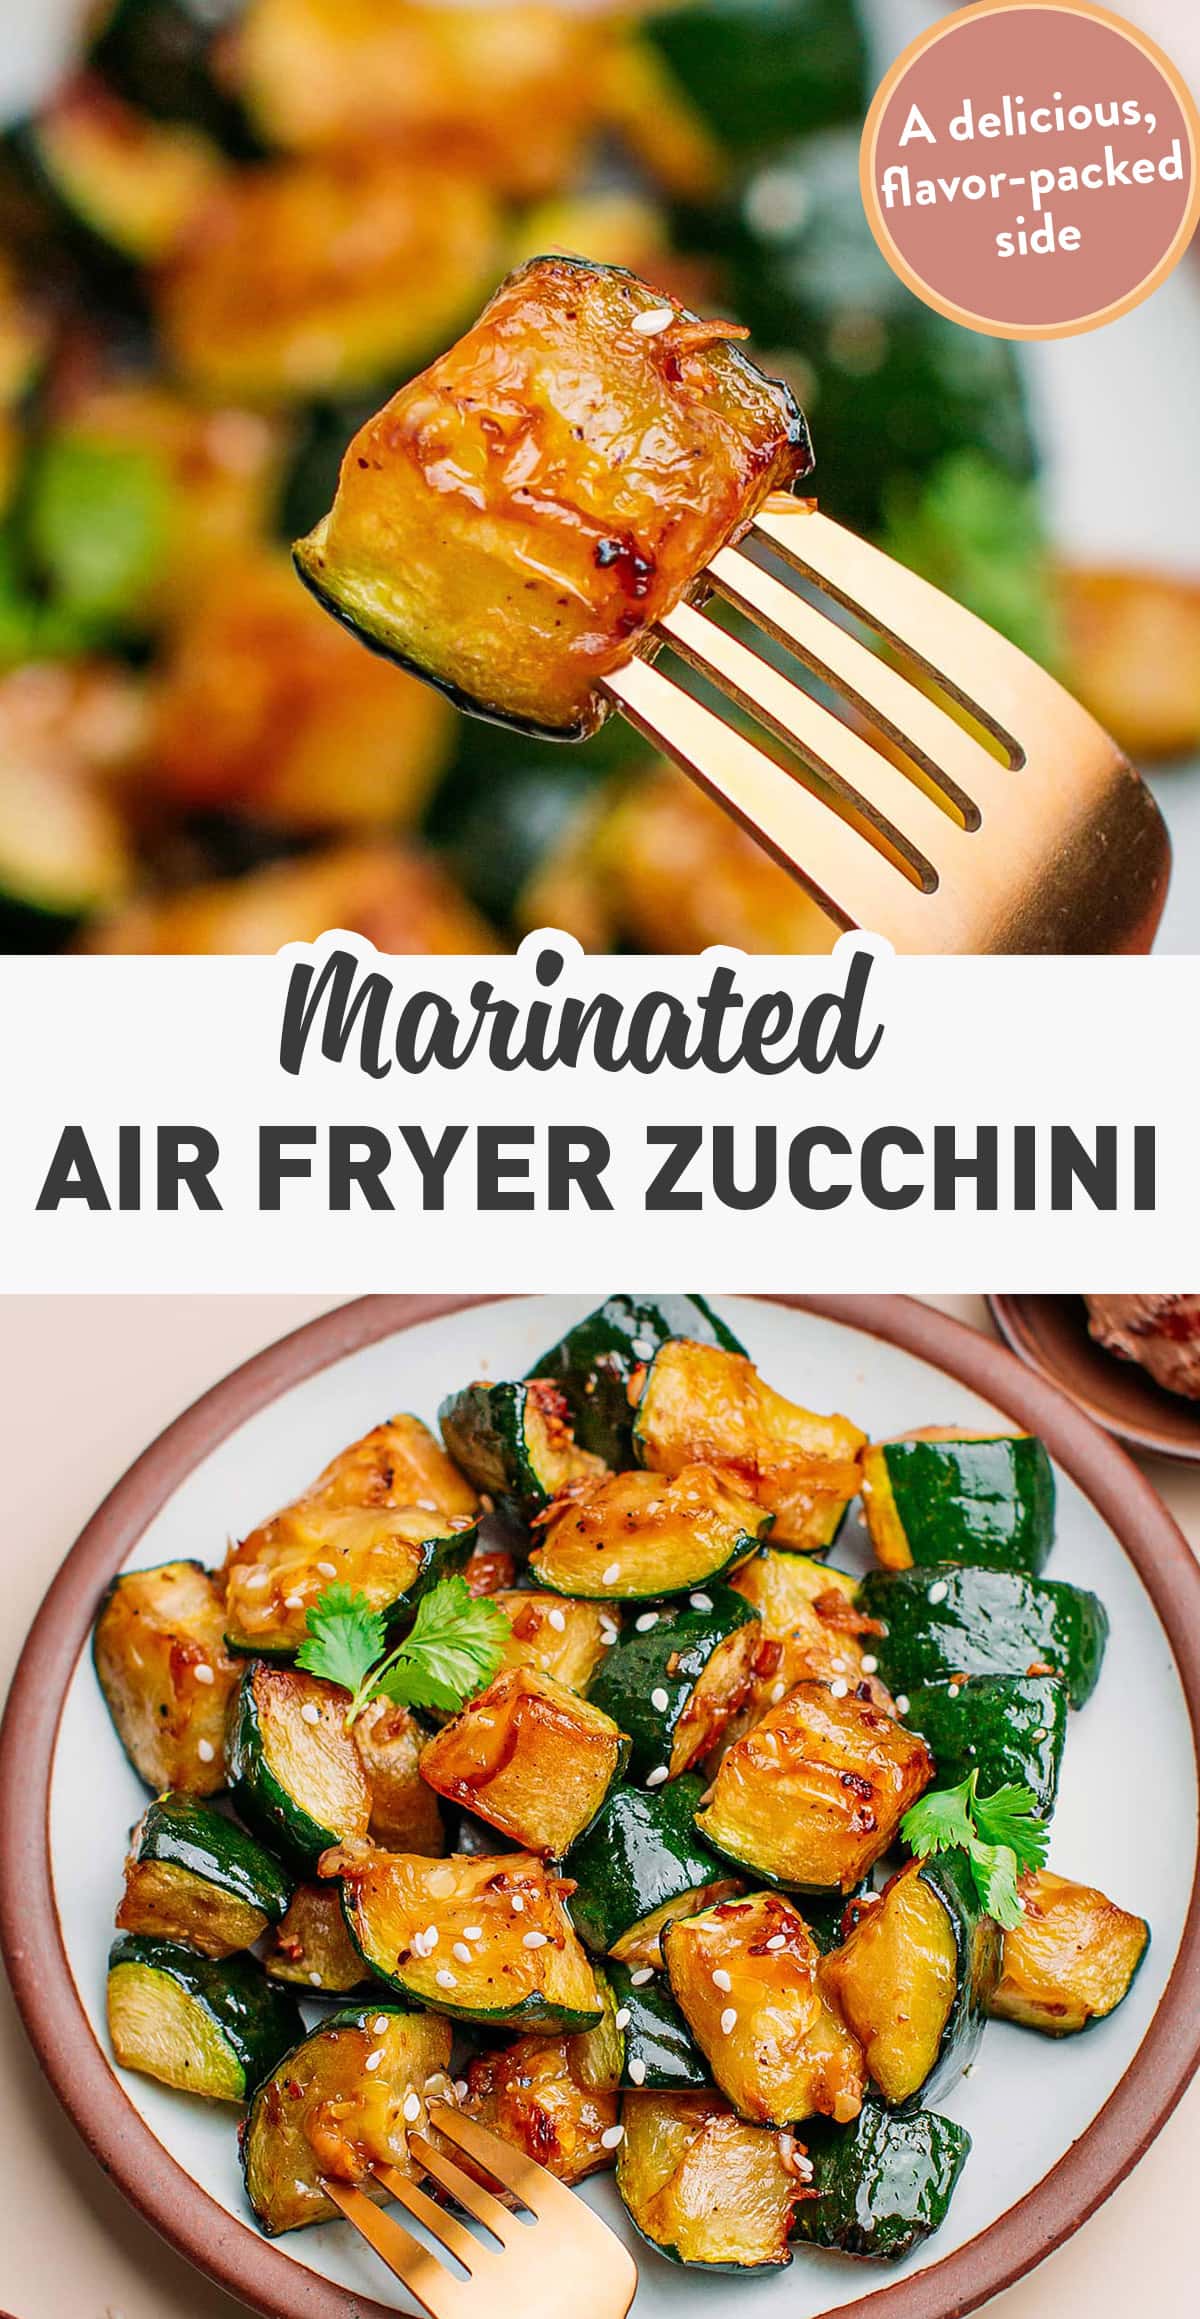 This air fryer zucchini is marinated in soy sauce, maple syrup, garlic, ginger, and air-fried until tender on the inside and slightly crispy on the edges. It has the perfect balance of salty, sweet, and citrusy flavors. A delicious, flavor-packed side that can be served with rice, quinoa, or your protein of choice! #airfryer #zucchini